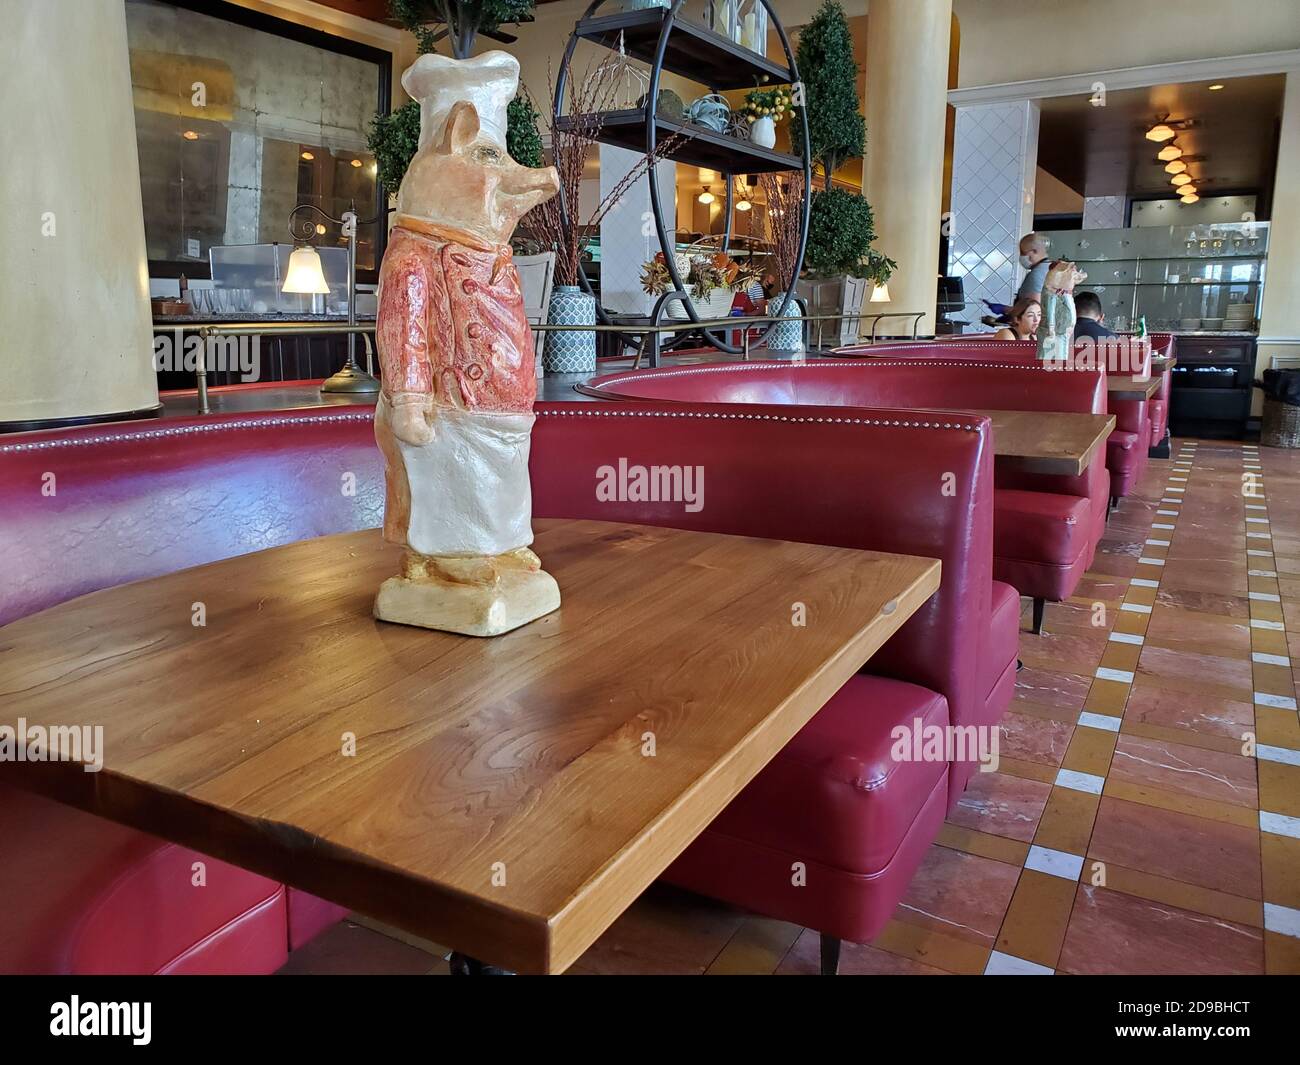 At a restaurant in San Jose, California, a ceramic pig statue is being used to block off tables to comply with social distancing requirements during Covid-19 coronavirus, October 18, 2020. () Stock Photo